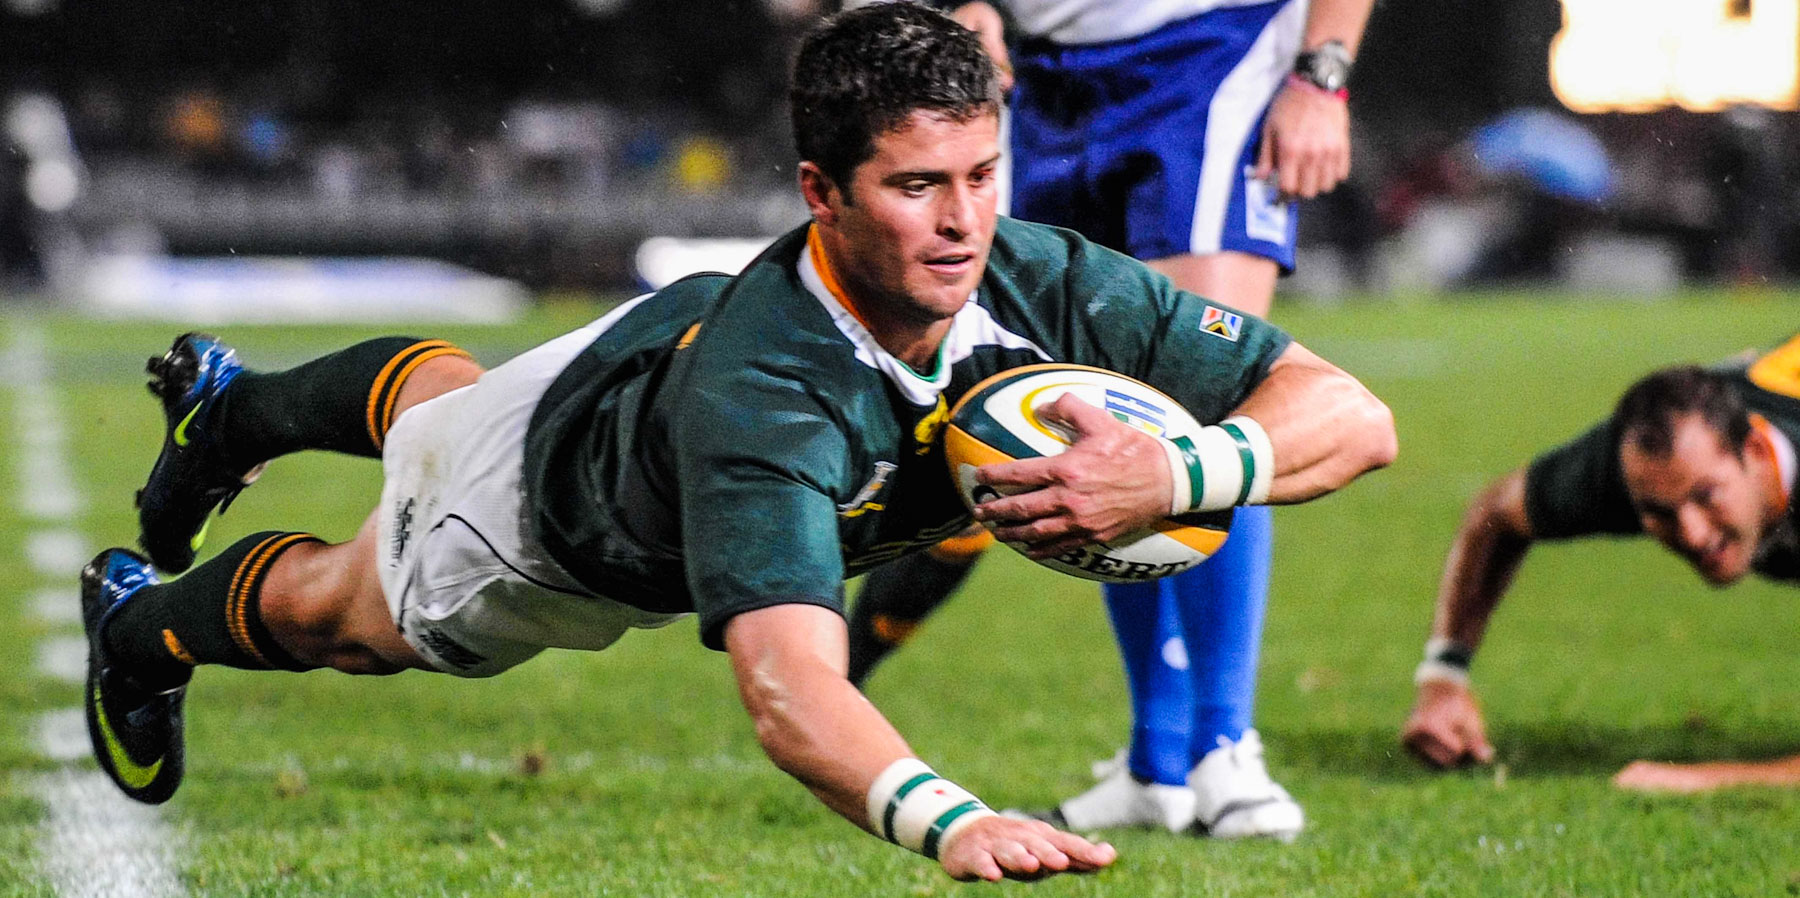 Back in Durban a few months later, Steyn scored all the points as the Boks beat the All Blacks by 31-19 (1 try, 1 conversion, 8 pens).